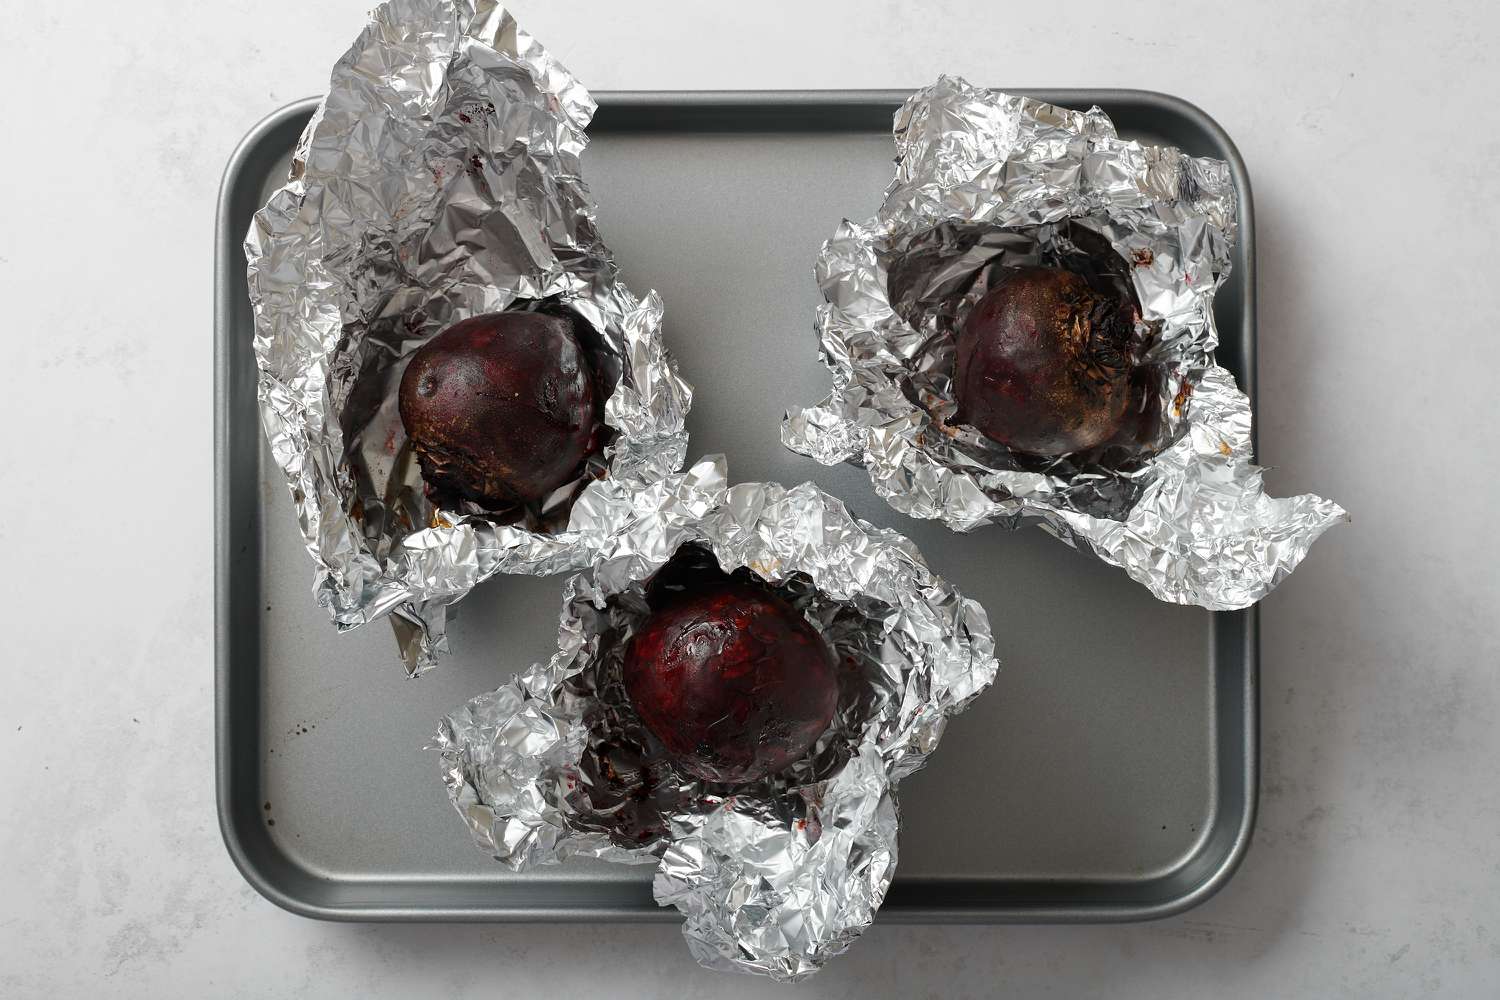 Baked beets wrapped in foil on a baking sheet